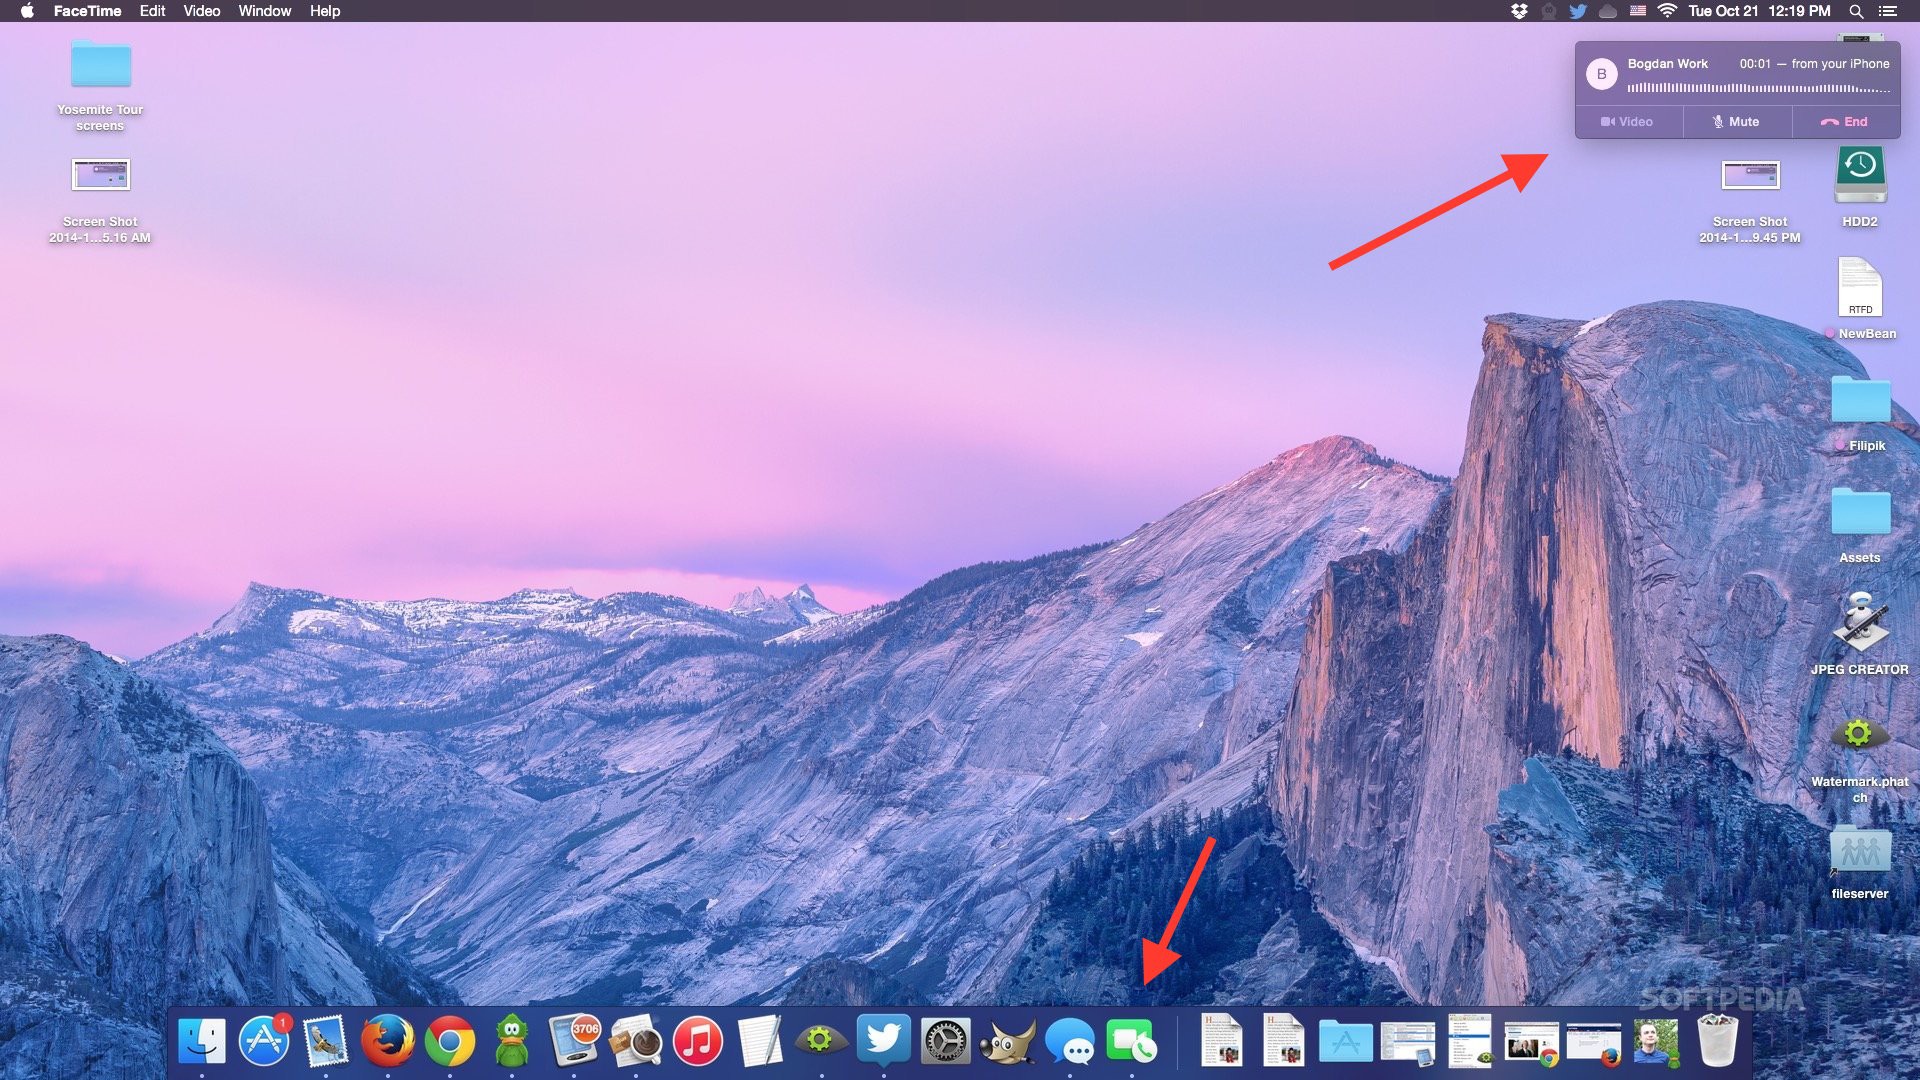 linux commands that work in os x yosemite